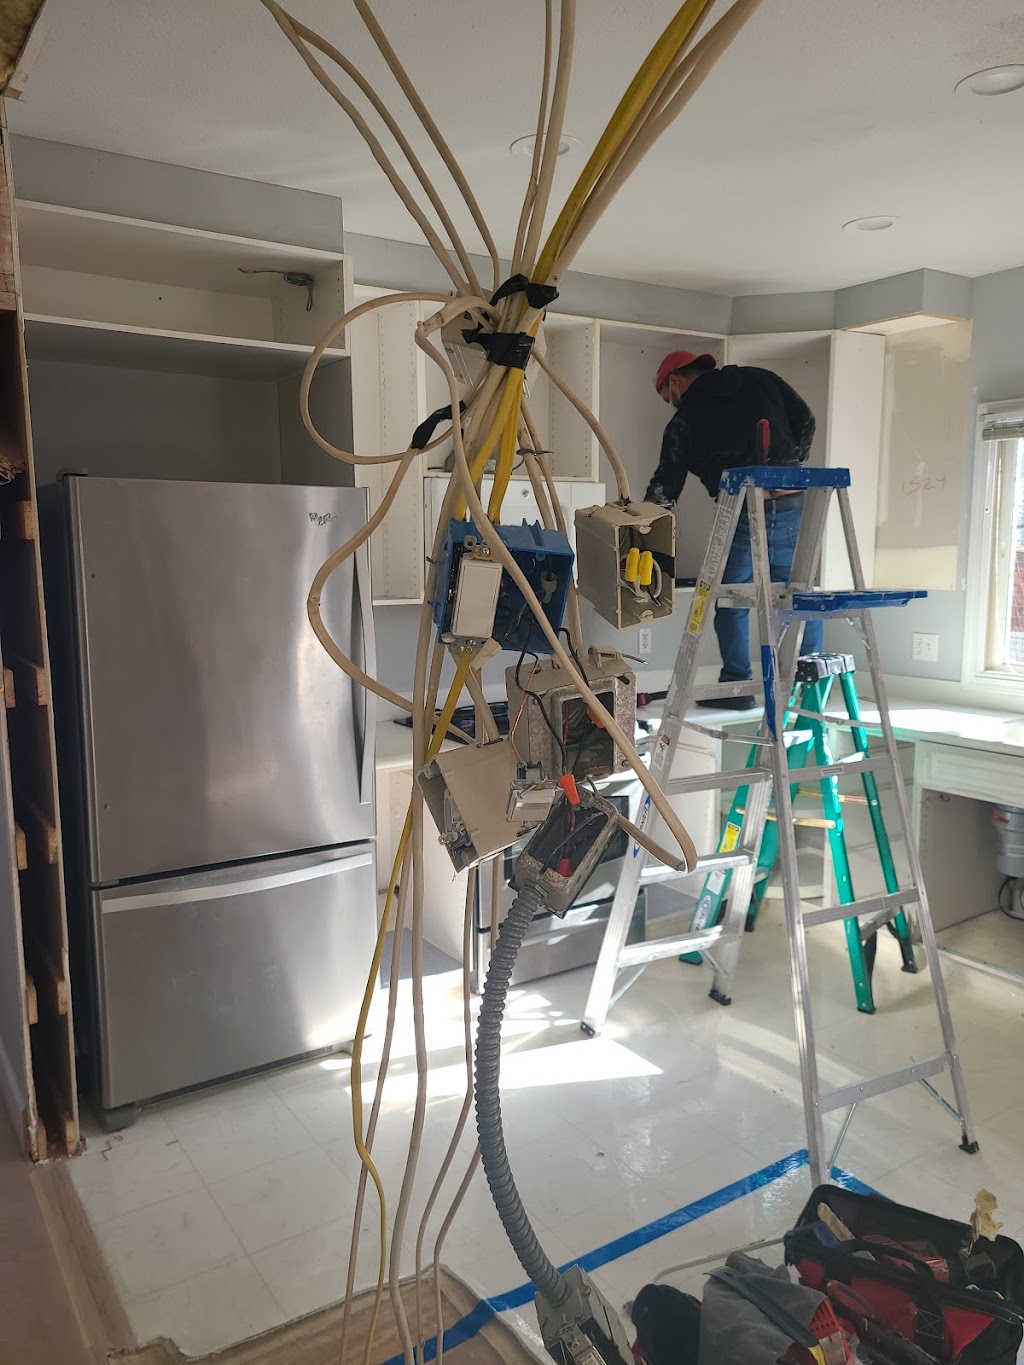 Electric remodel services | 520 Walker Dr, Mountain View, CA 94043 | Phone: (650) 421-6844